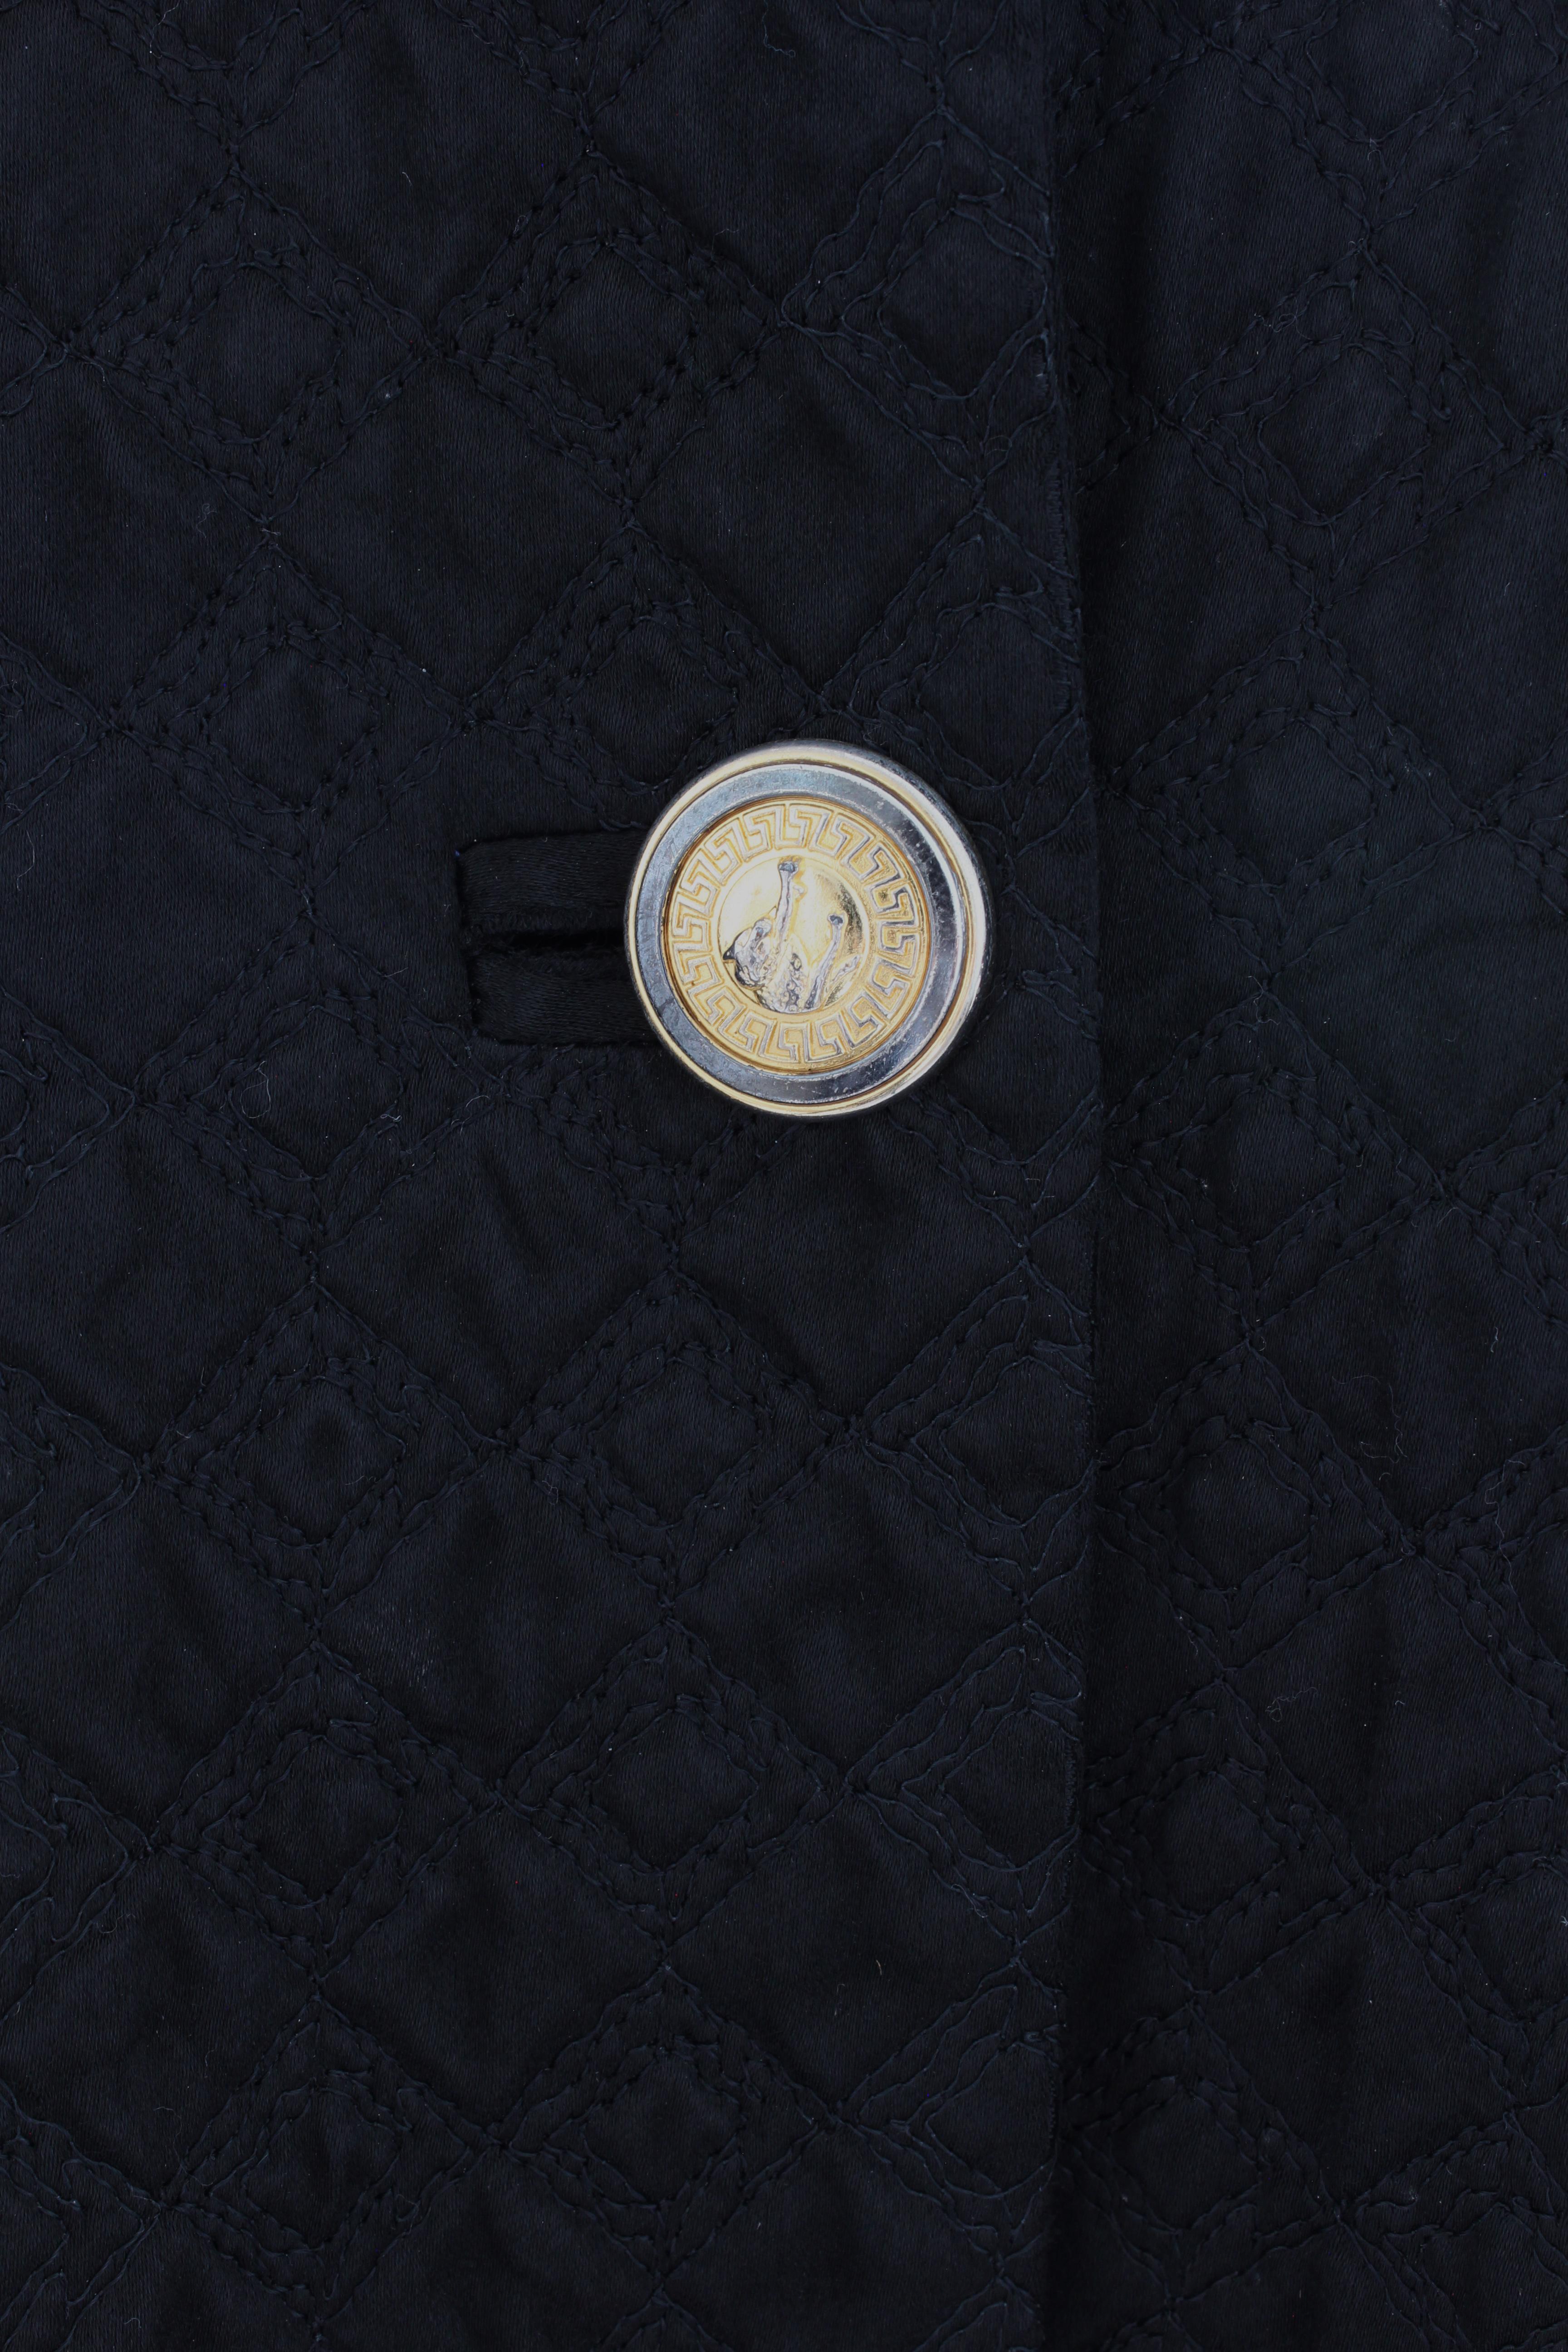 Gianni Versace Jacket or Swing Coat Diamond Quilted Black Satin with Fur Trim 38 5